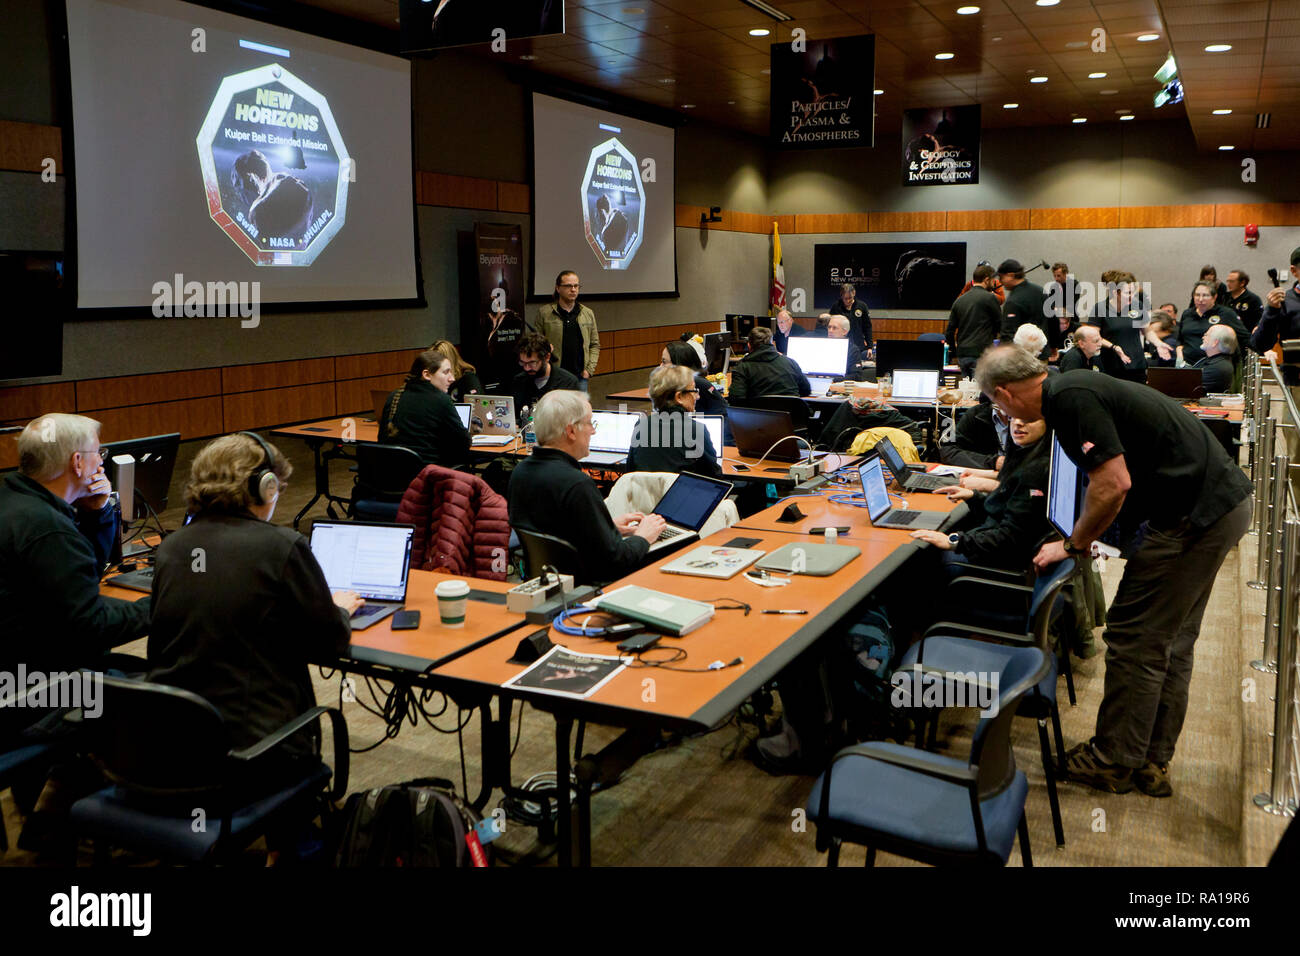 Laurel, Maryland USA, 29th December, 2018: The Johns Hopkins University Applied Physics Laboratory (APL) Mission Operations Center and  Science Operations Center prepare for its interplanetary space probe New Horizons flyby of a Kuiper Belt object Ultima Thule.  New Horizons is scheduled to arrive at Ultima Thule on 05:33 UTC, 1st, January 2019. Credit: B Christopher/Alamy Live News Stock Photo